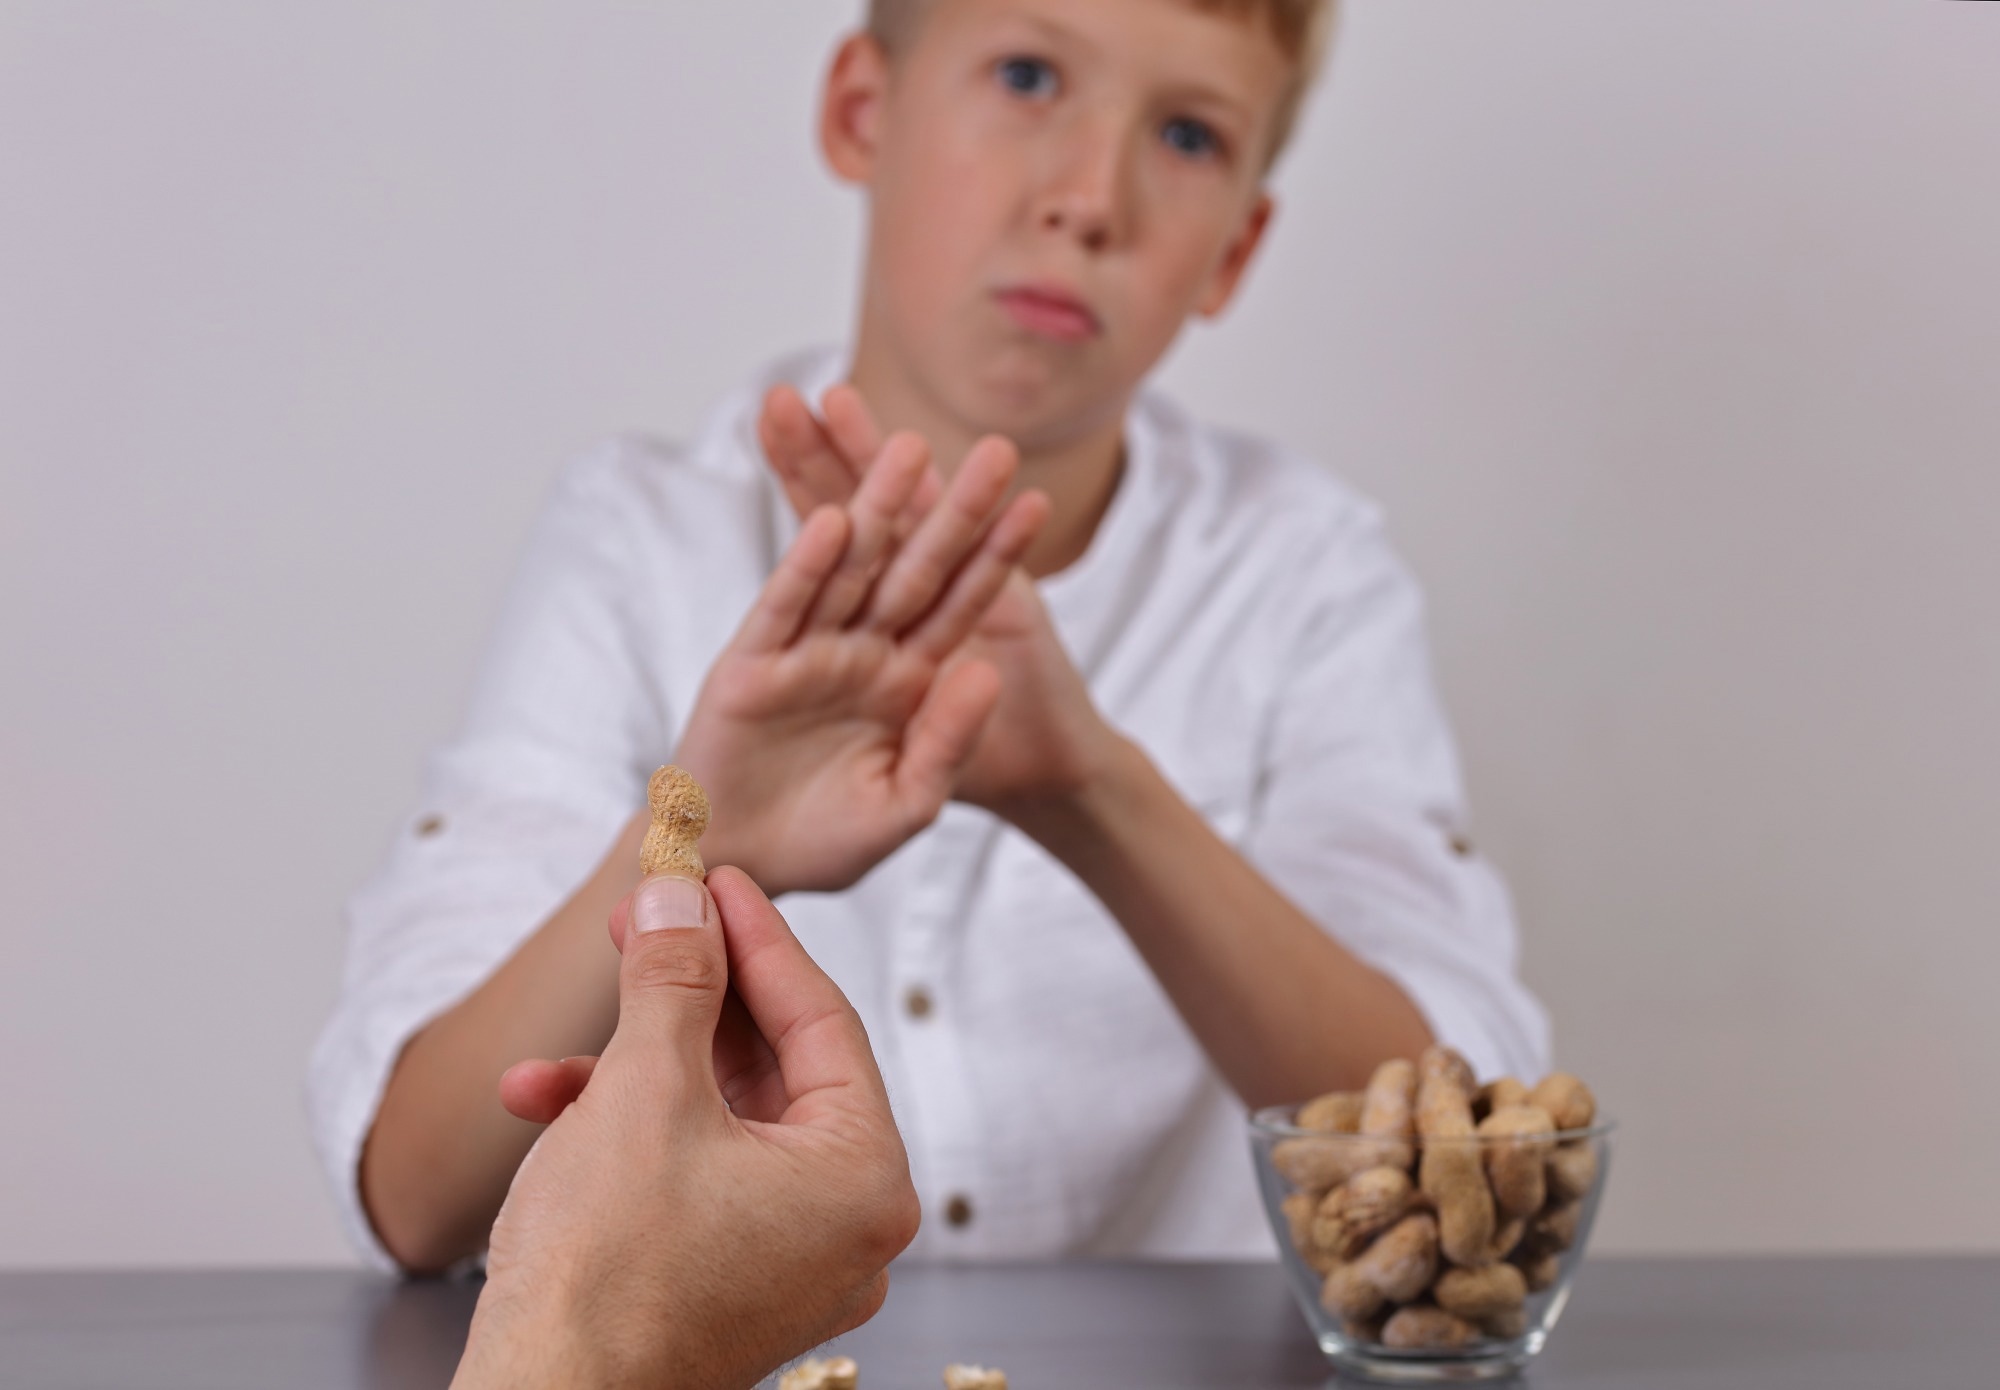 Study: Novel peanut-specific human IgE monoclonal antibodies enable screens for inhibitors of the effector phase in food allergy. Image Credit: Albina Gavrilovic / Shutterstock